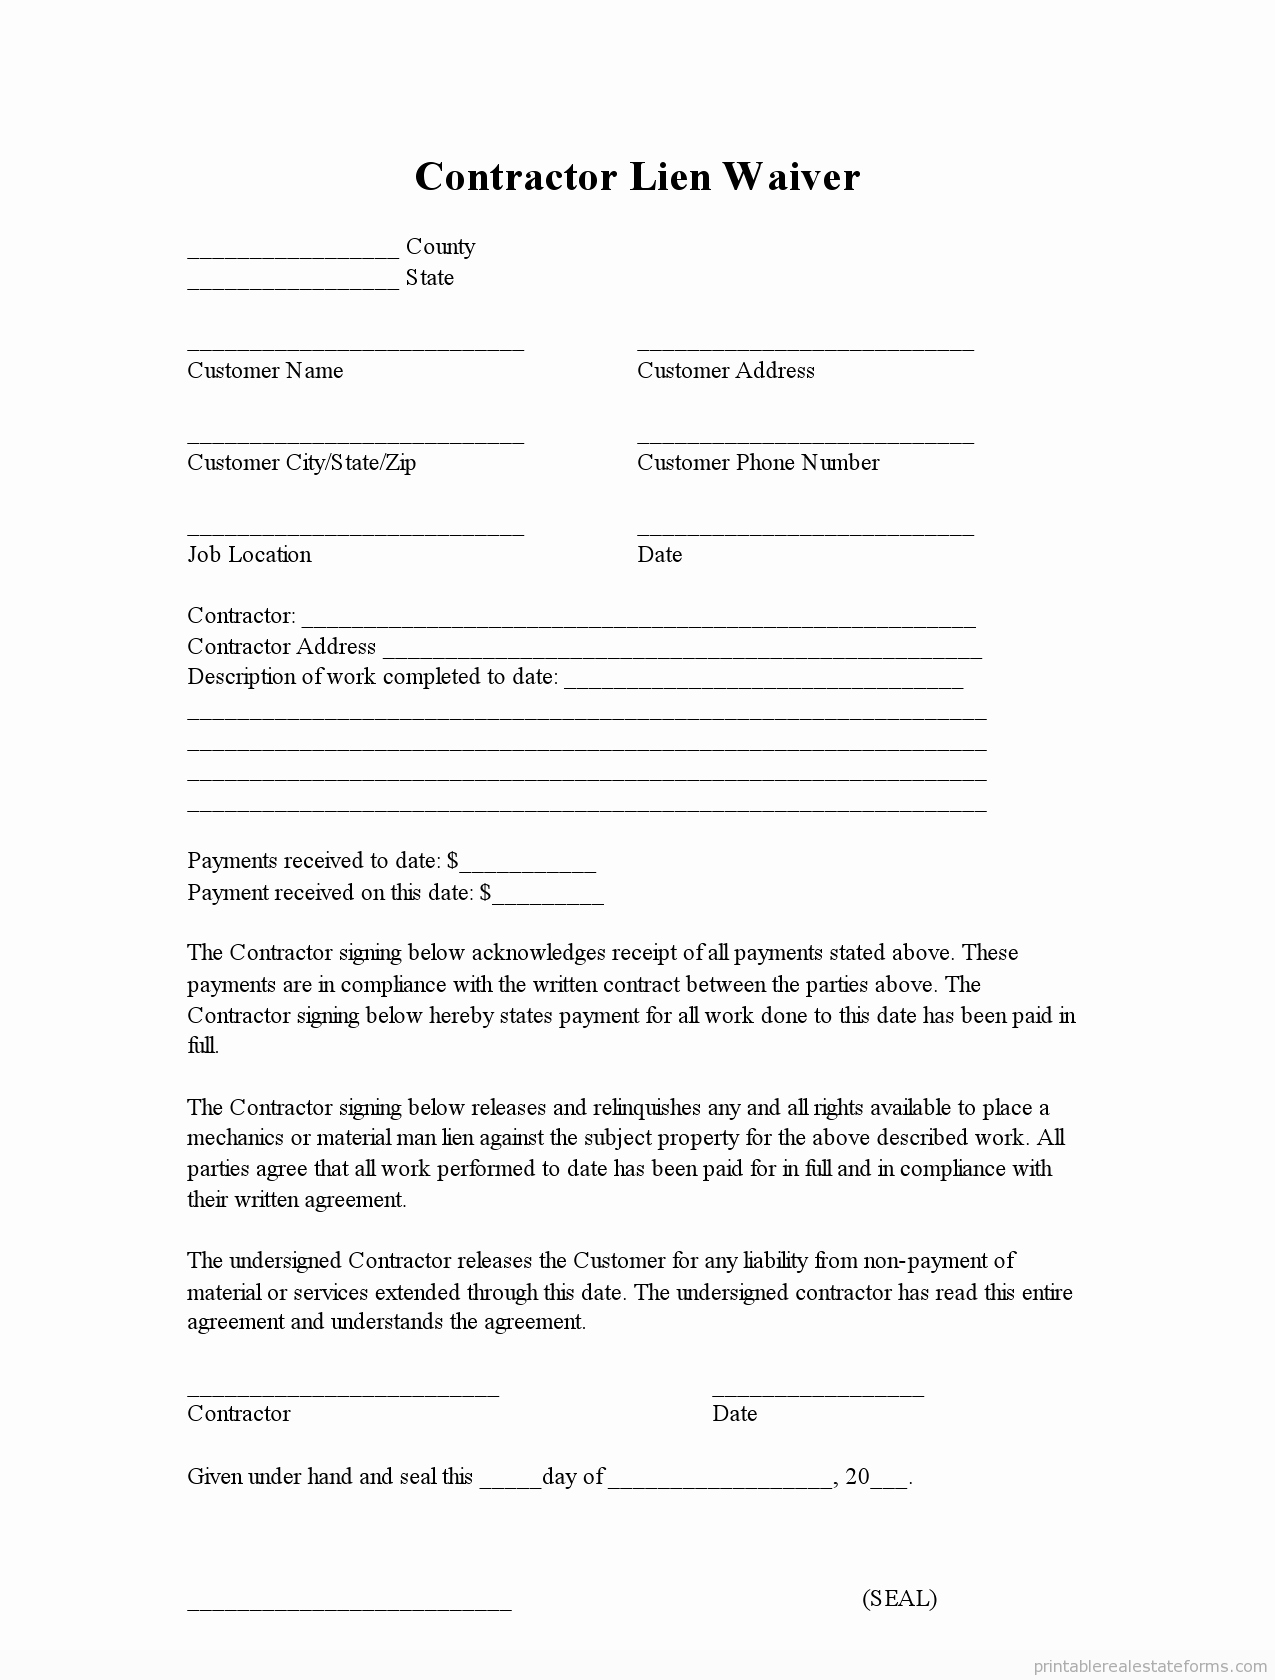 Final Lien Waiver Template Luxury Sample Printable Contractor Lien Waiver form